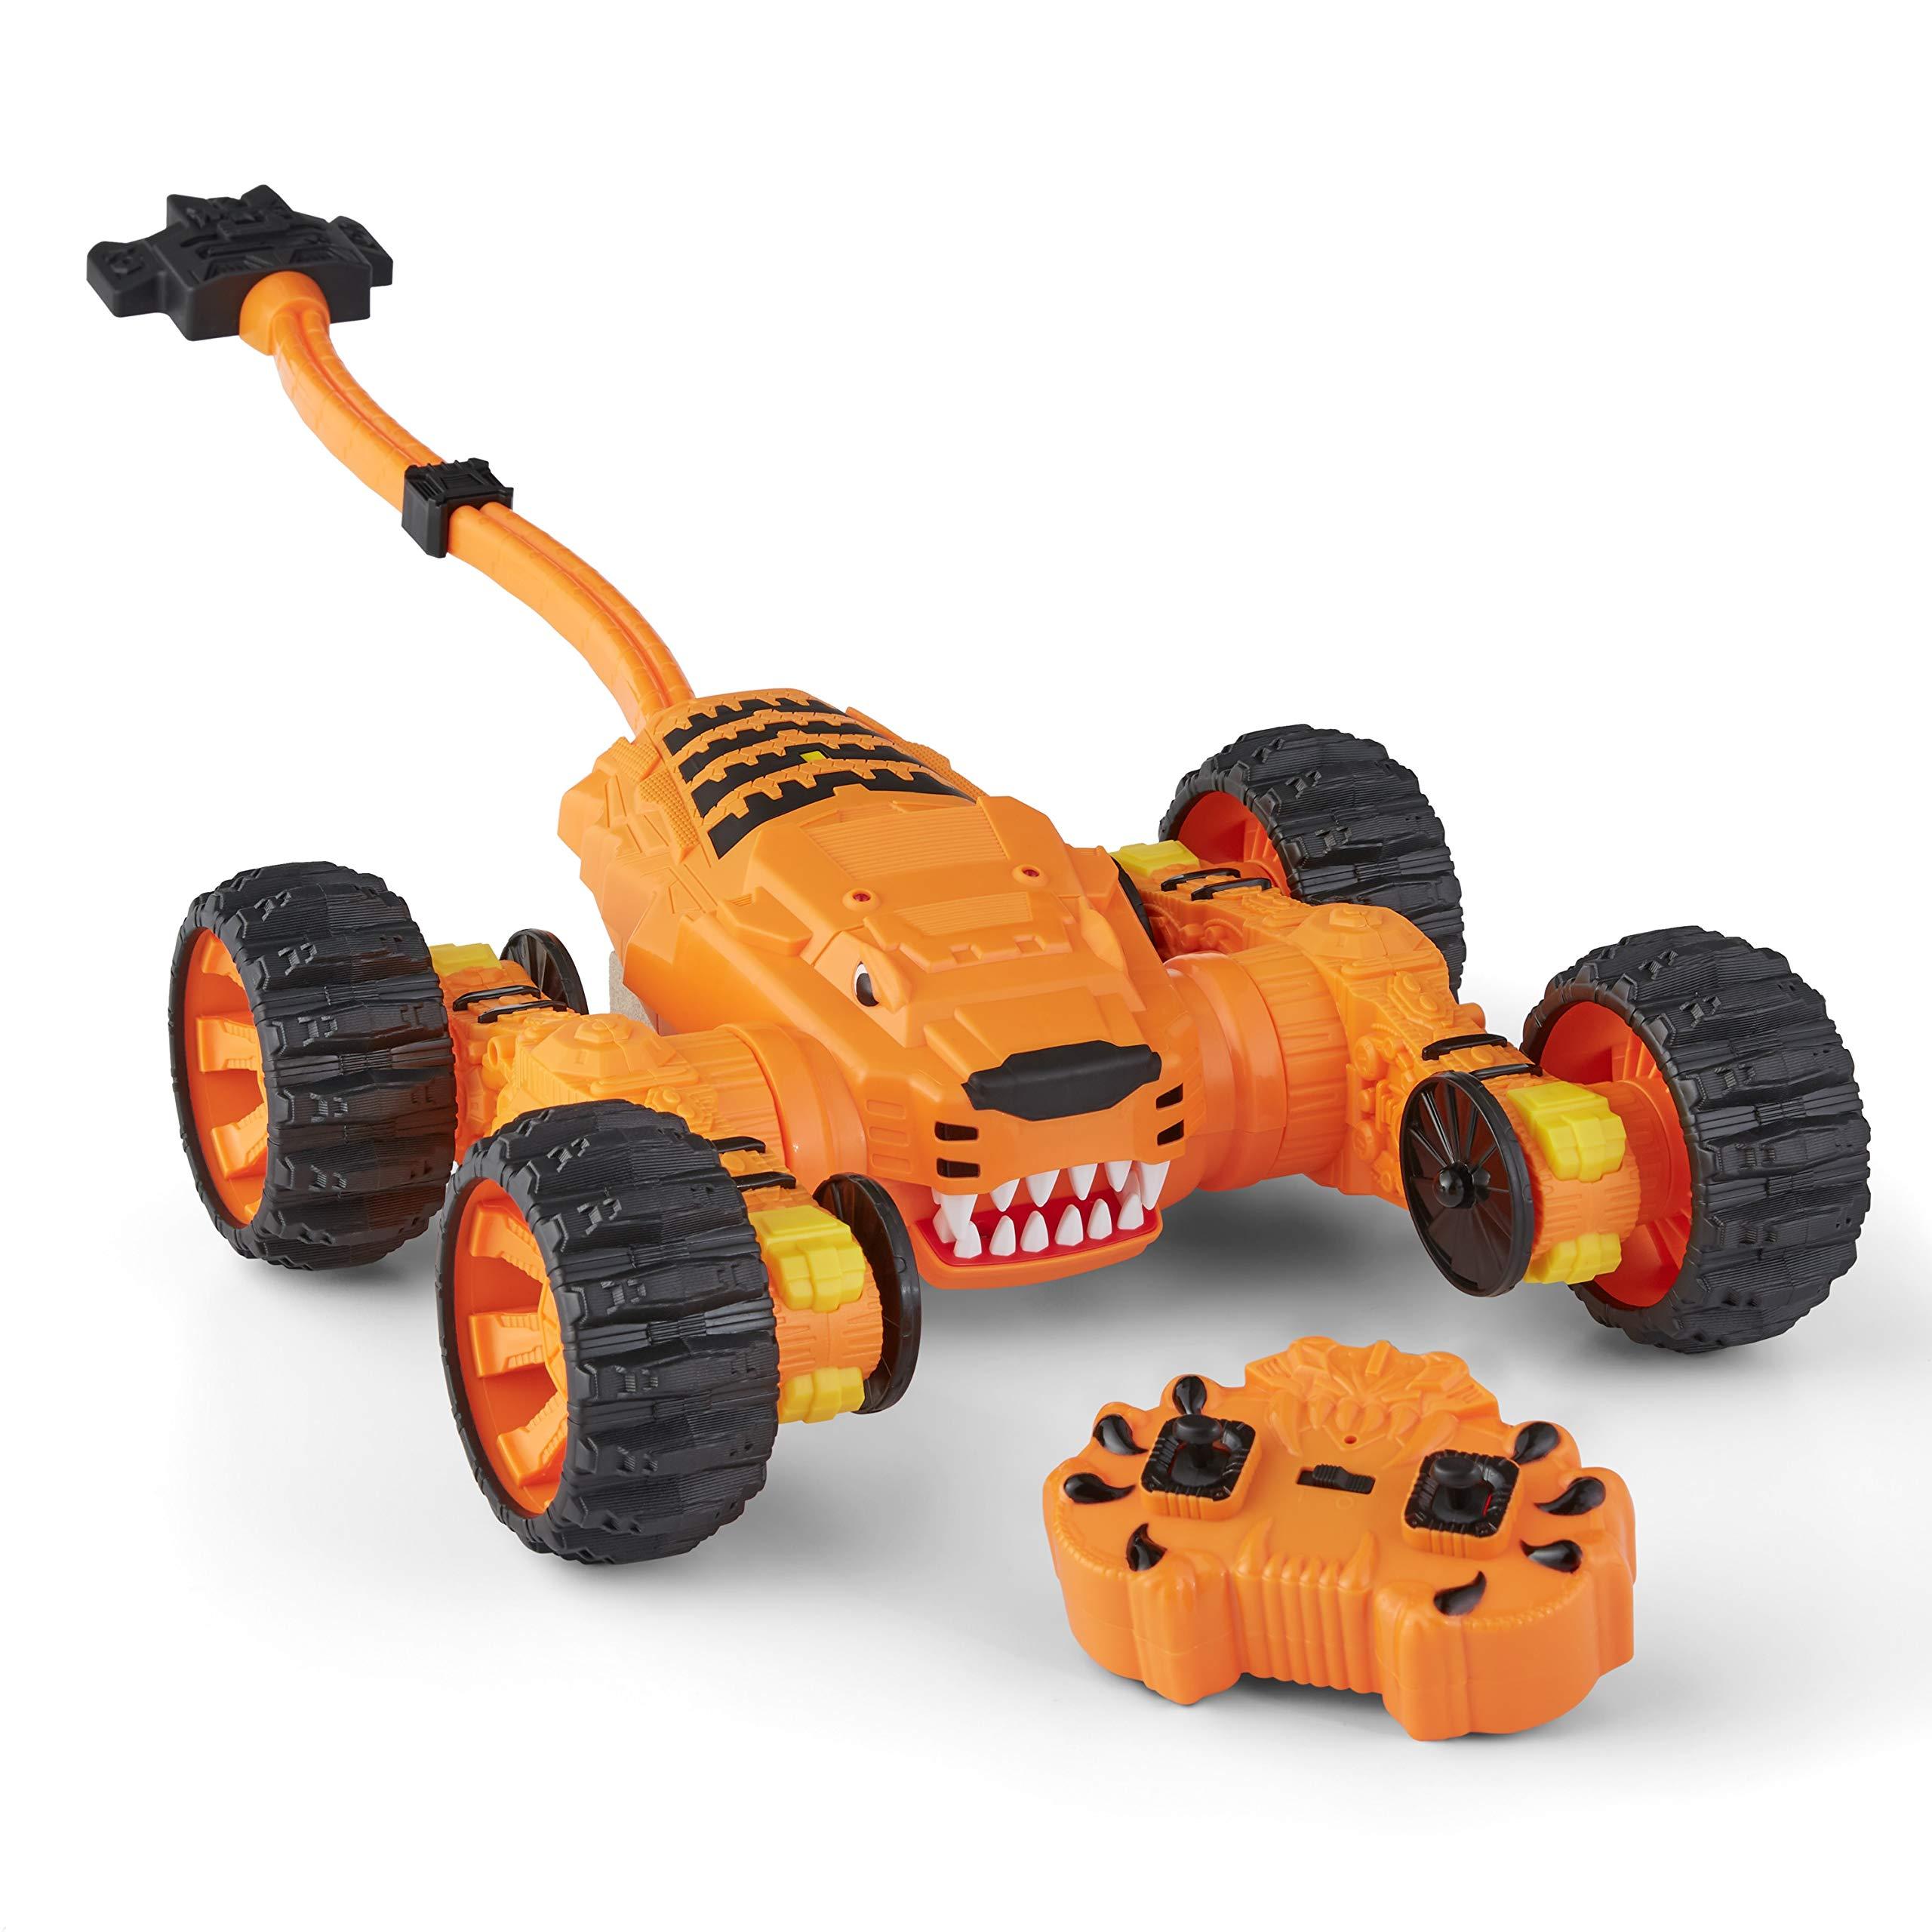 Tiger Remote Control Car: Impressive Speed, Long Battery Life, and Far-Reaching Connection: What Sets the Tiger Remote Control Car Apart